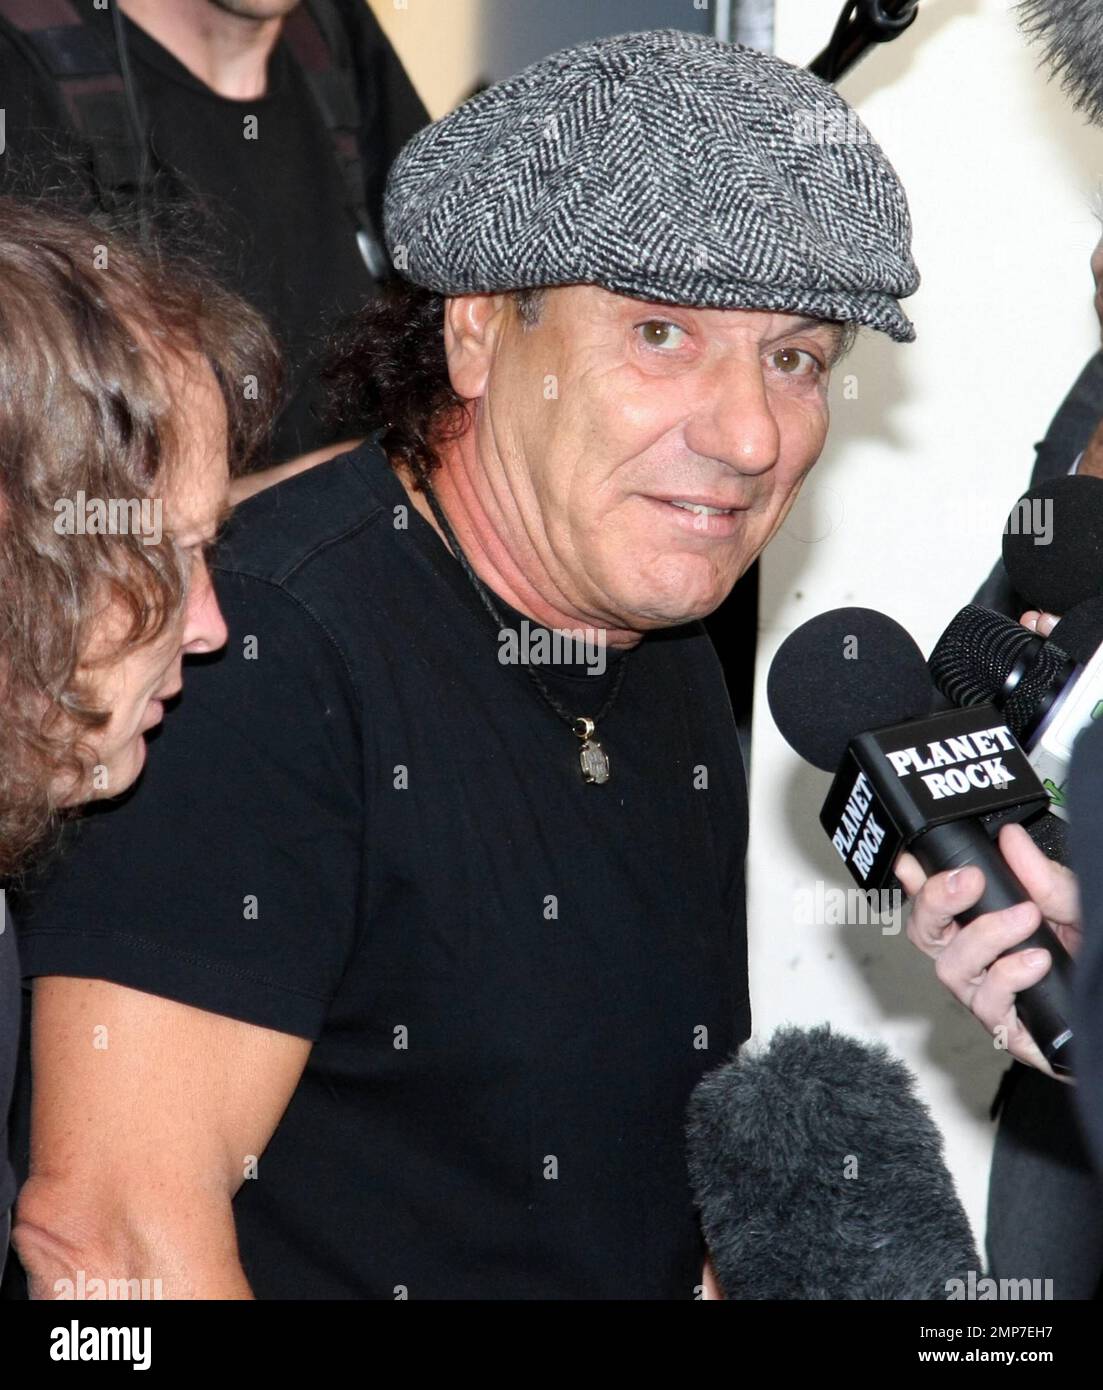 AC/DC band member Brian Johnson at the AC/DC 'Live at River Plate' DVD World Premiere at the HMV Hammersmith Apollo. London, UK. 5/6/11. Stock Photo